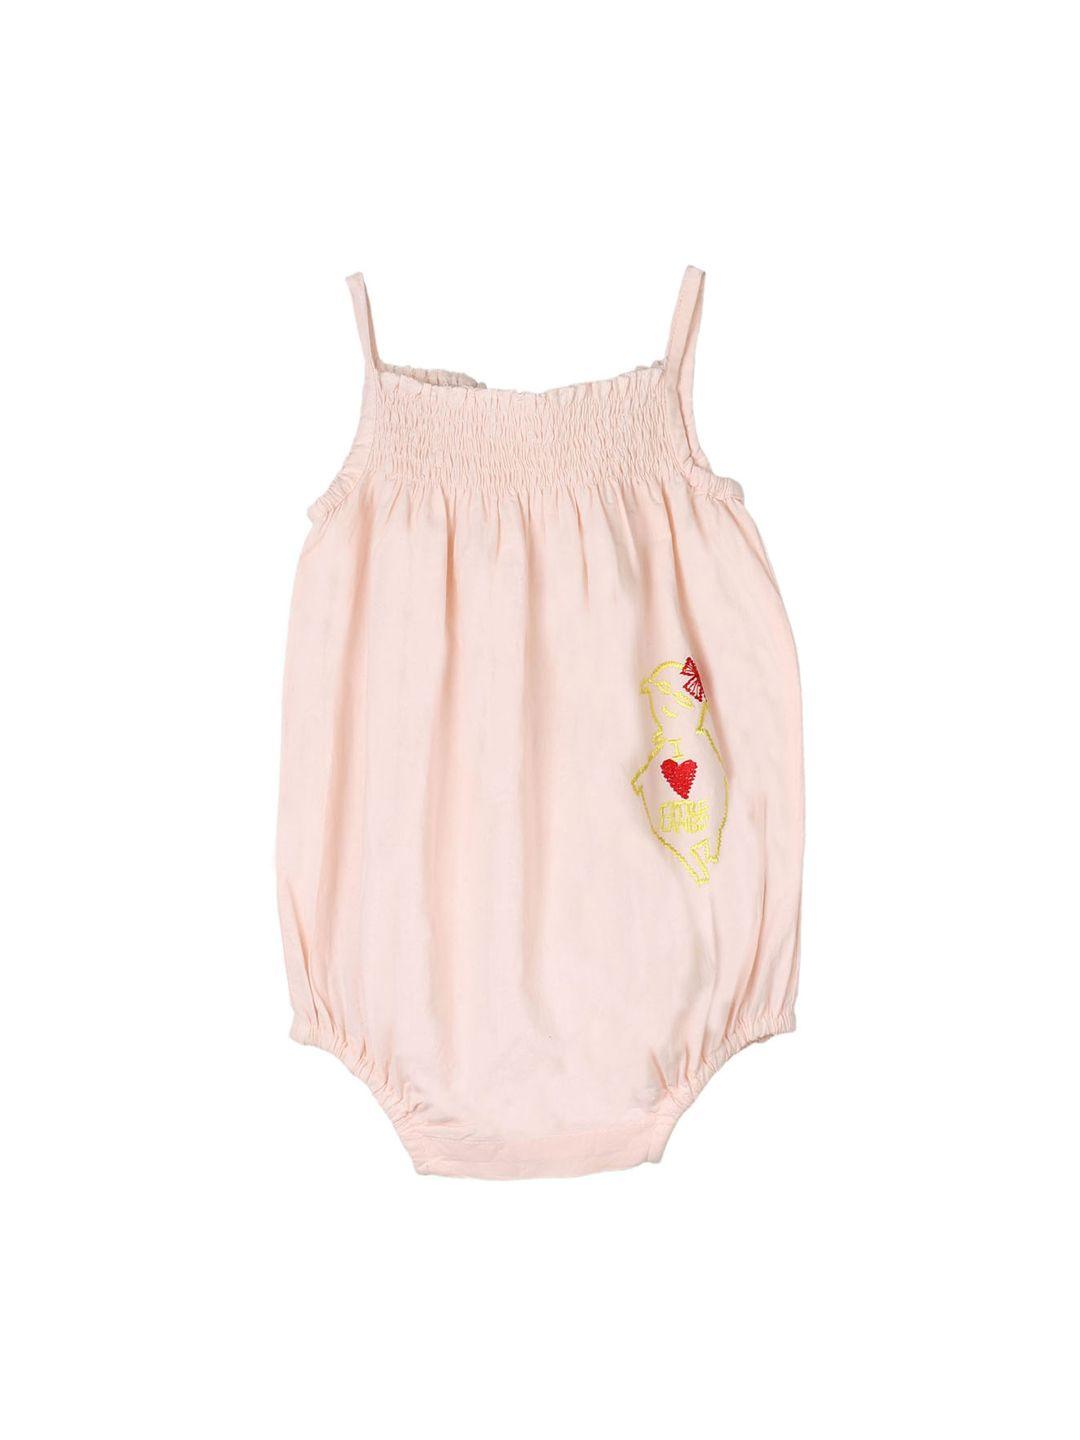 my-little-lambs-kids-peach-solid-rompers